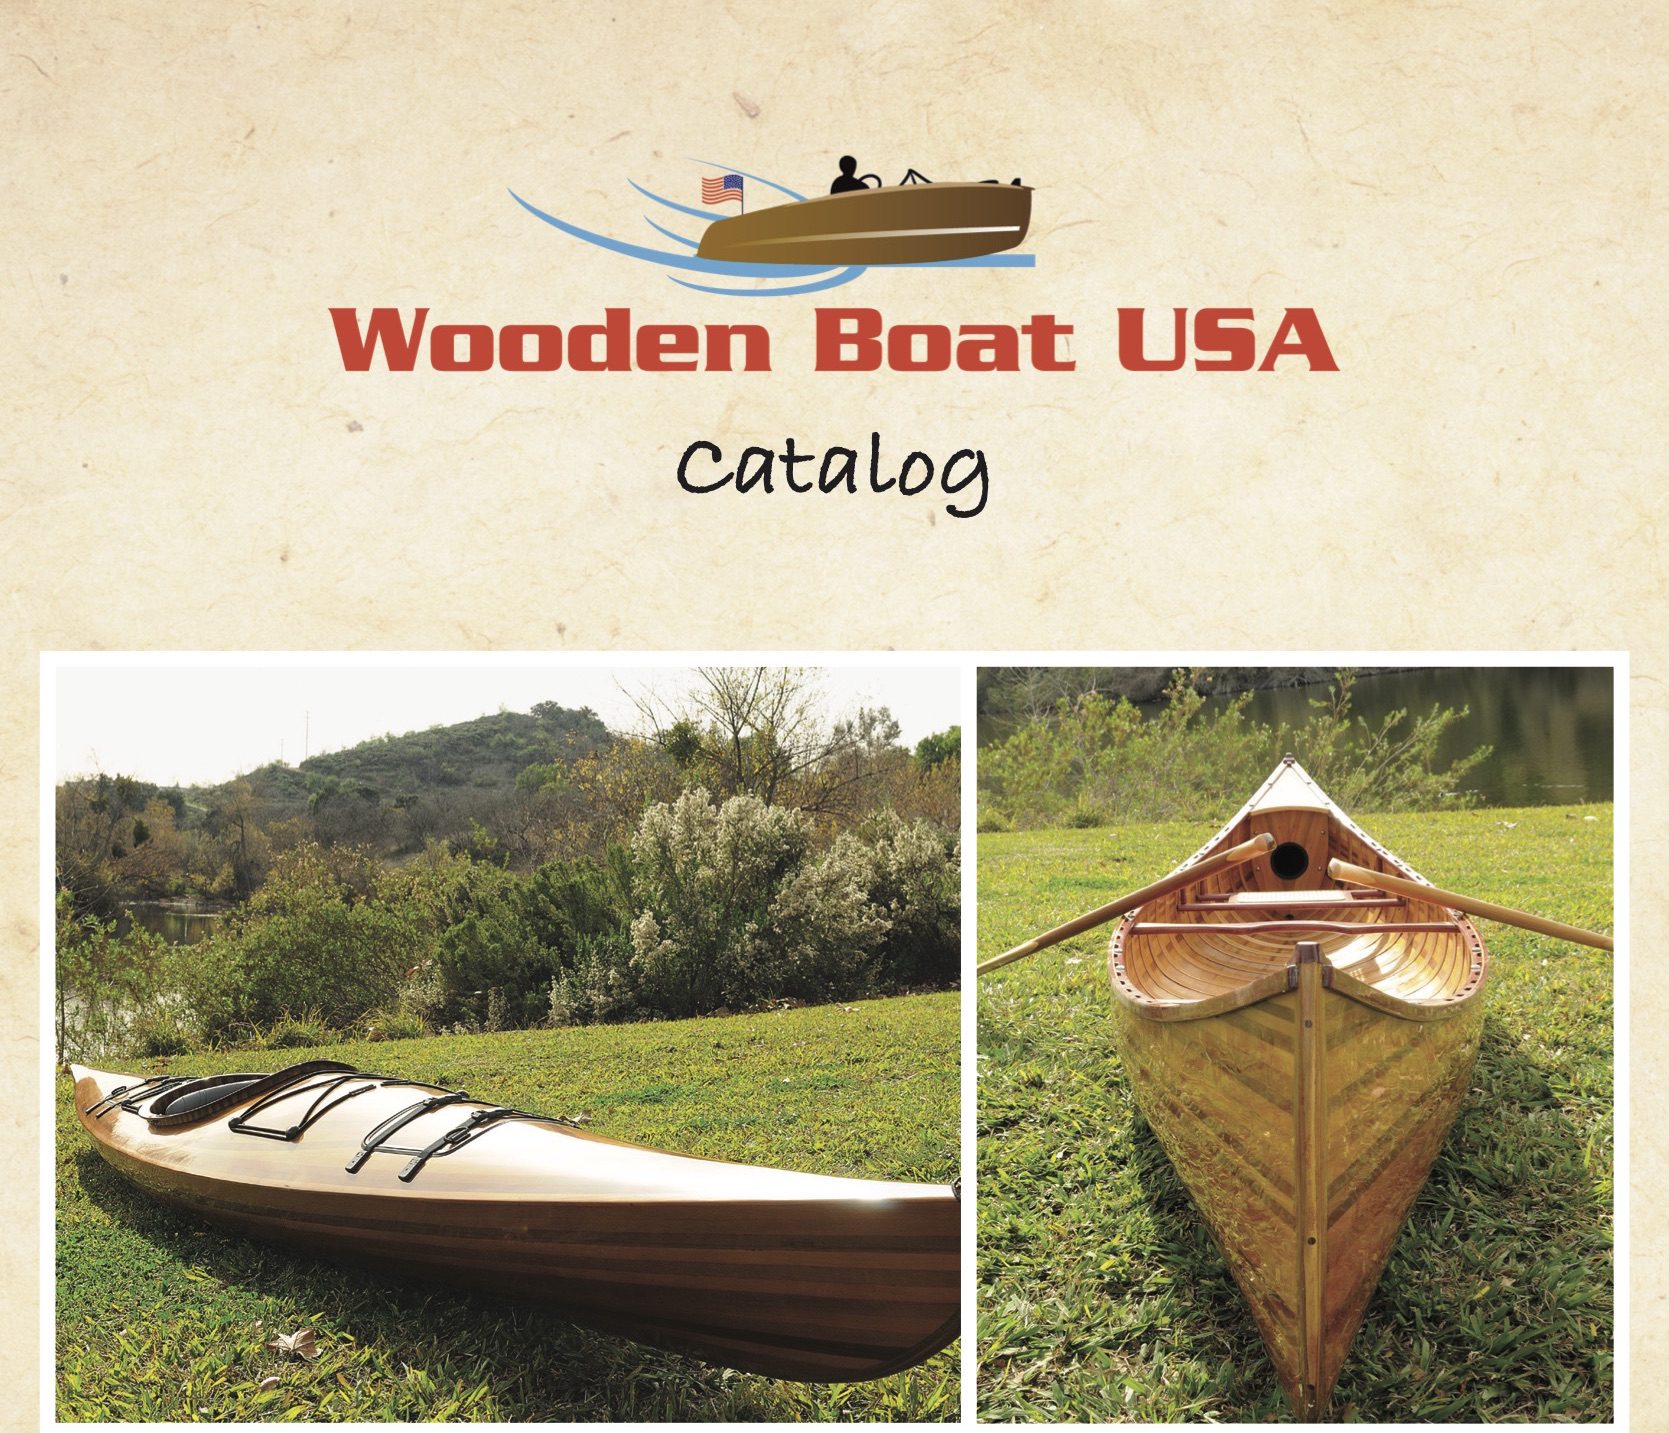 Buy Top Quality Handcrafted Wooden Boats - Wooden Boat USA